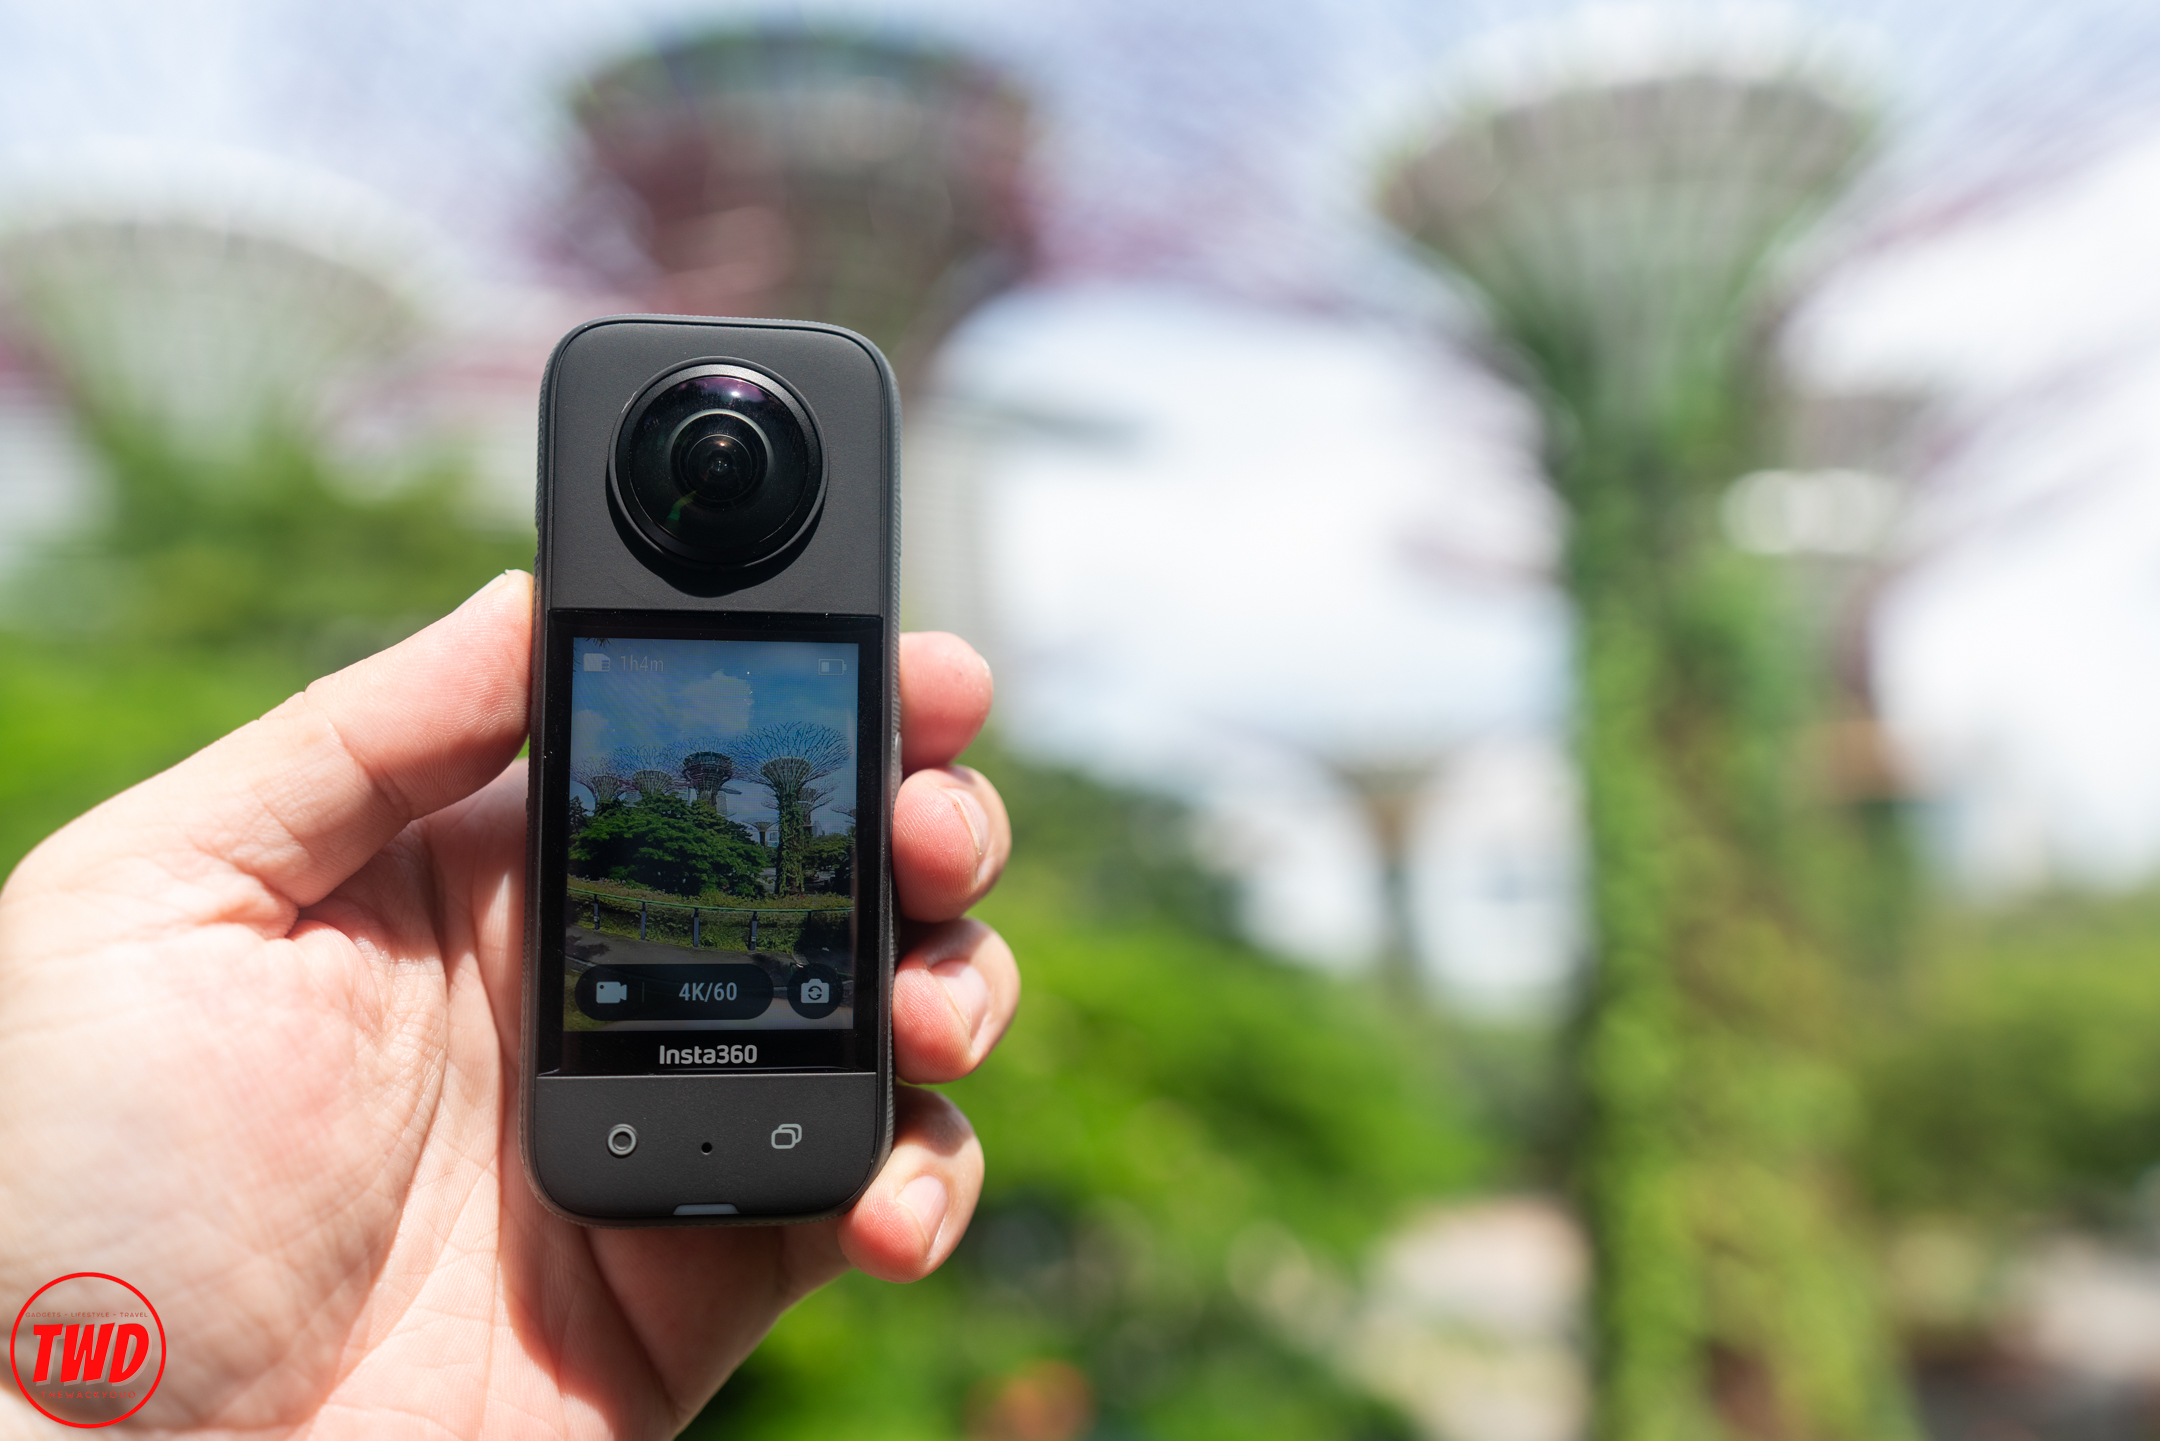 Insta360 X3 Review: Unleashing Limitless Creativity for Content Creators